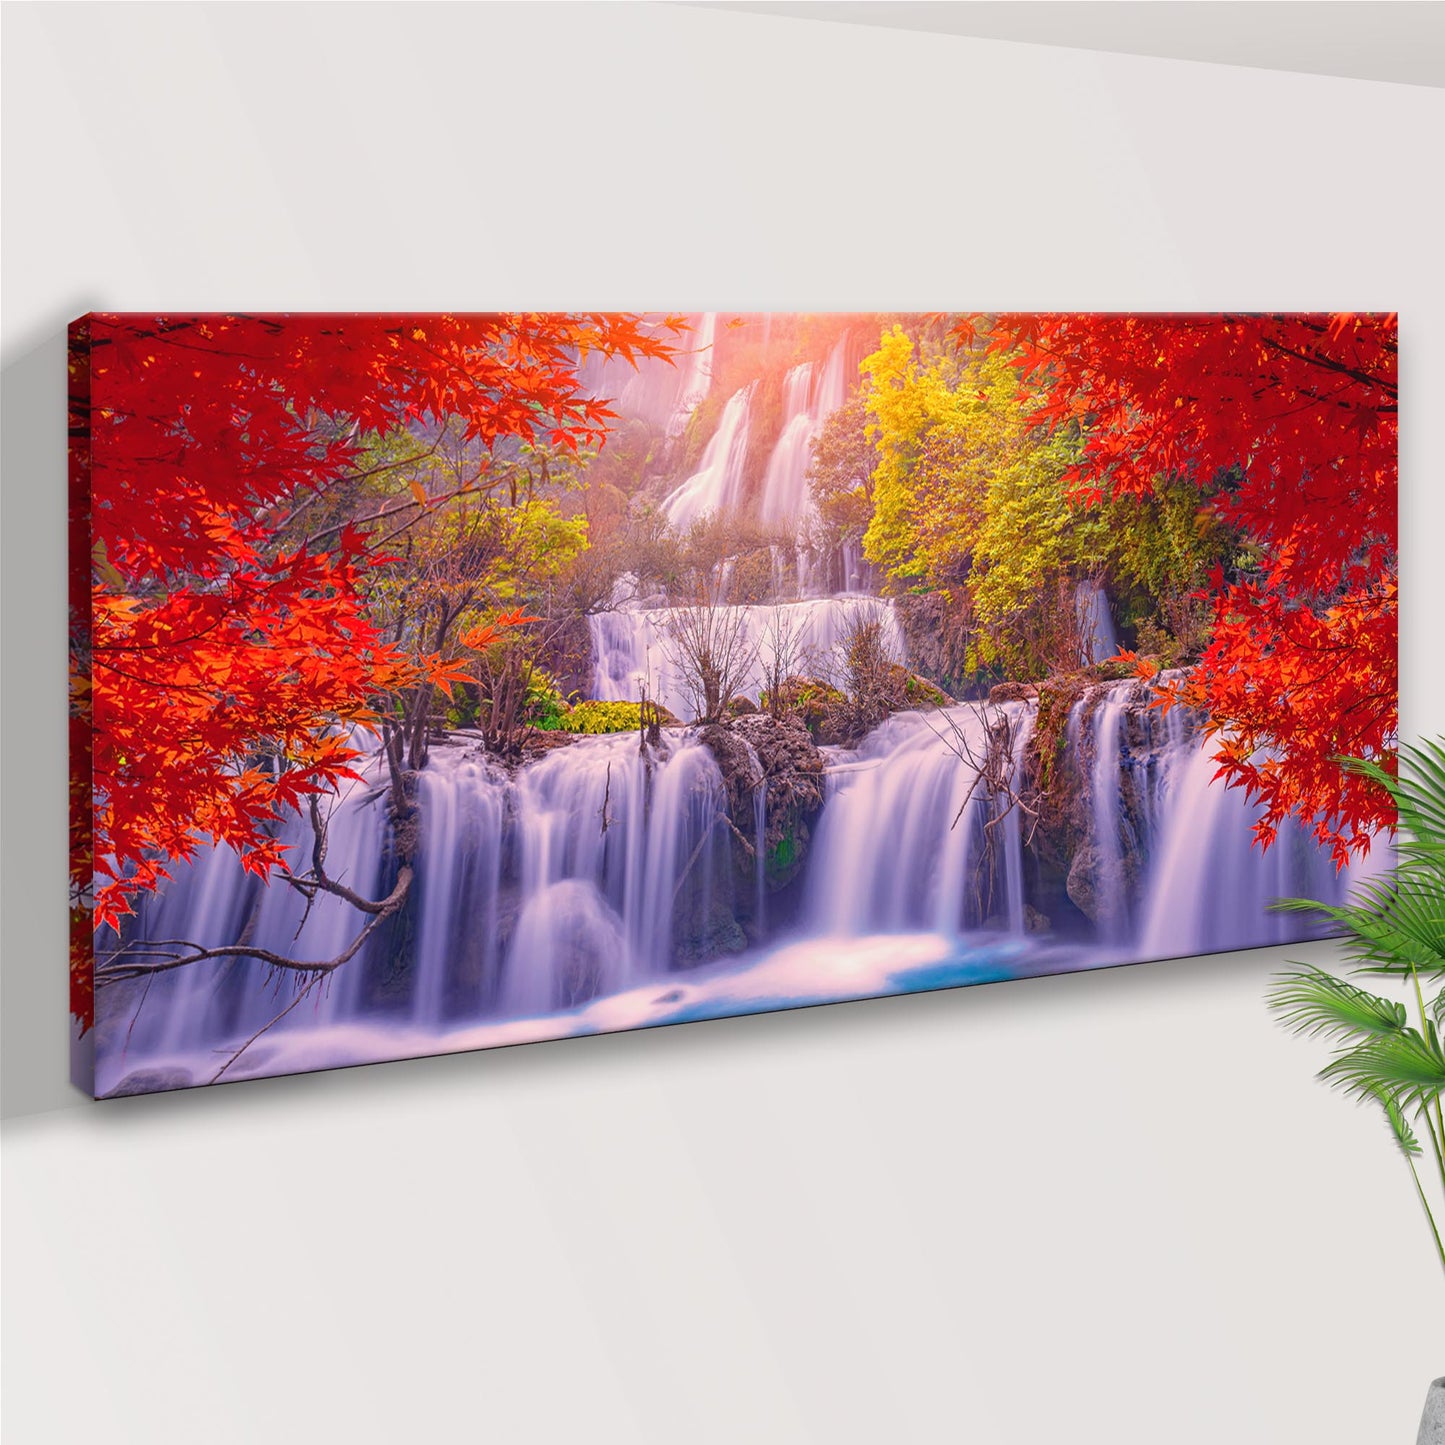 Autumn Waterfalls Canvas Wall Art Style 1 - Image by Tailored Canvases